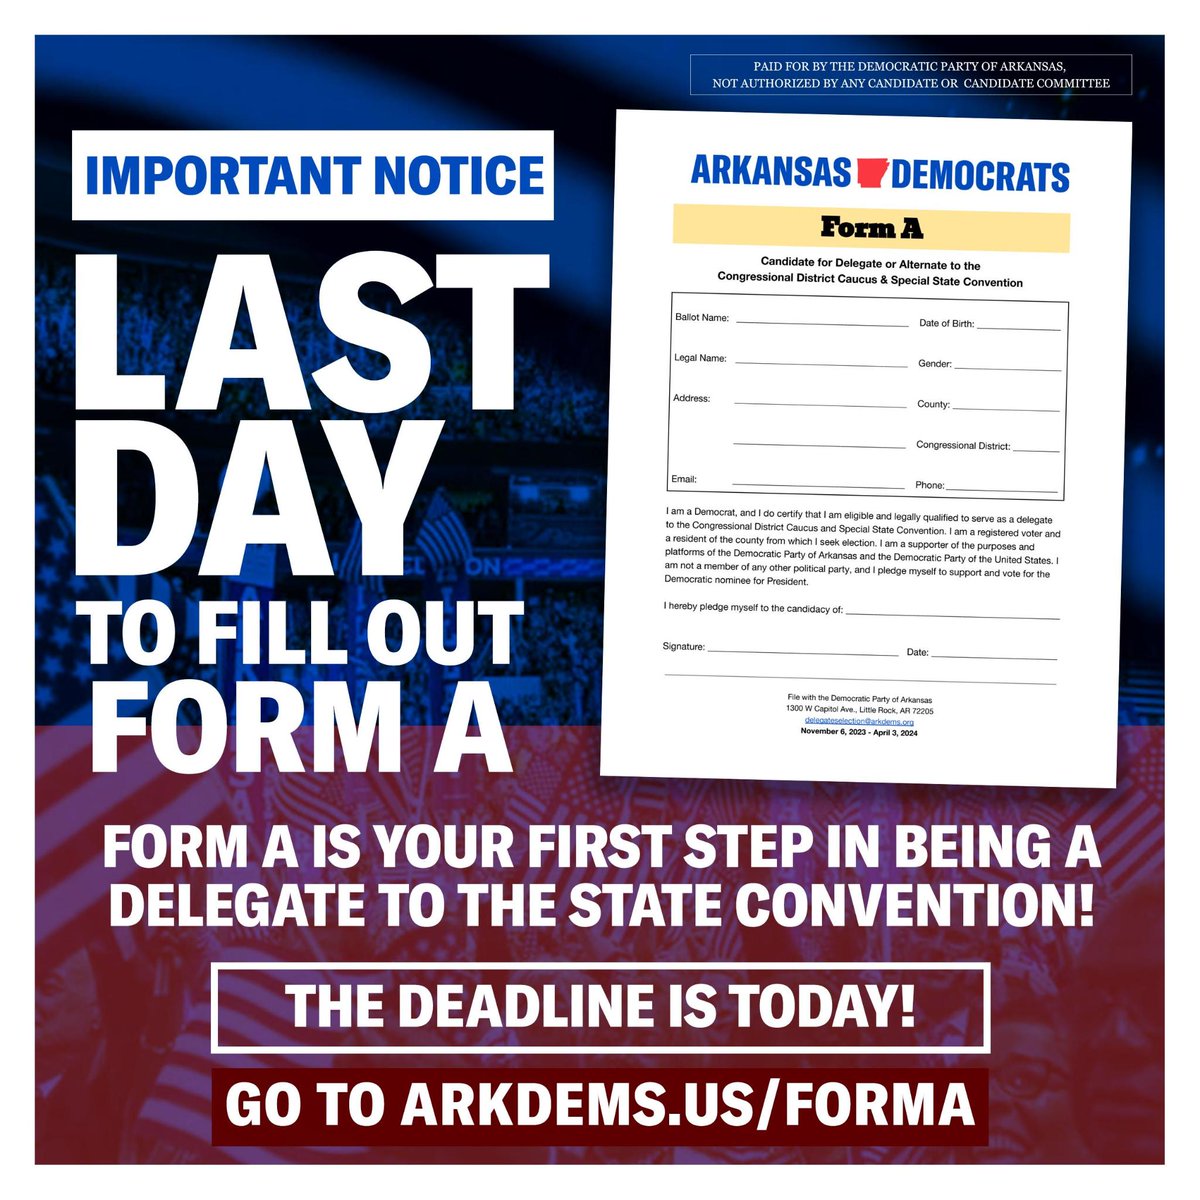 ⏰⏰ ONLY A FEW HOURS LEFT ⏰⏰ Arkansas Democrats — TIME IS RUNNING OUT TO HELP RE-ELECT @POTUS & @VP Fill out Form A to secure your voting status at the Arkansas Special State Convention! It only takes under 5 minutes: arkdems.us/FormA